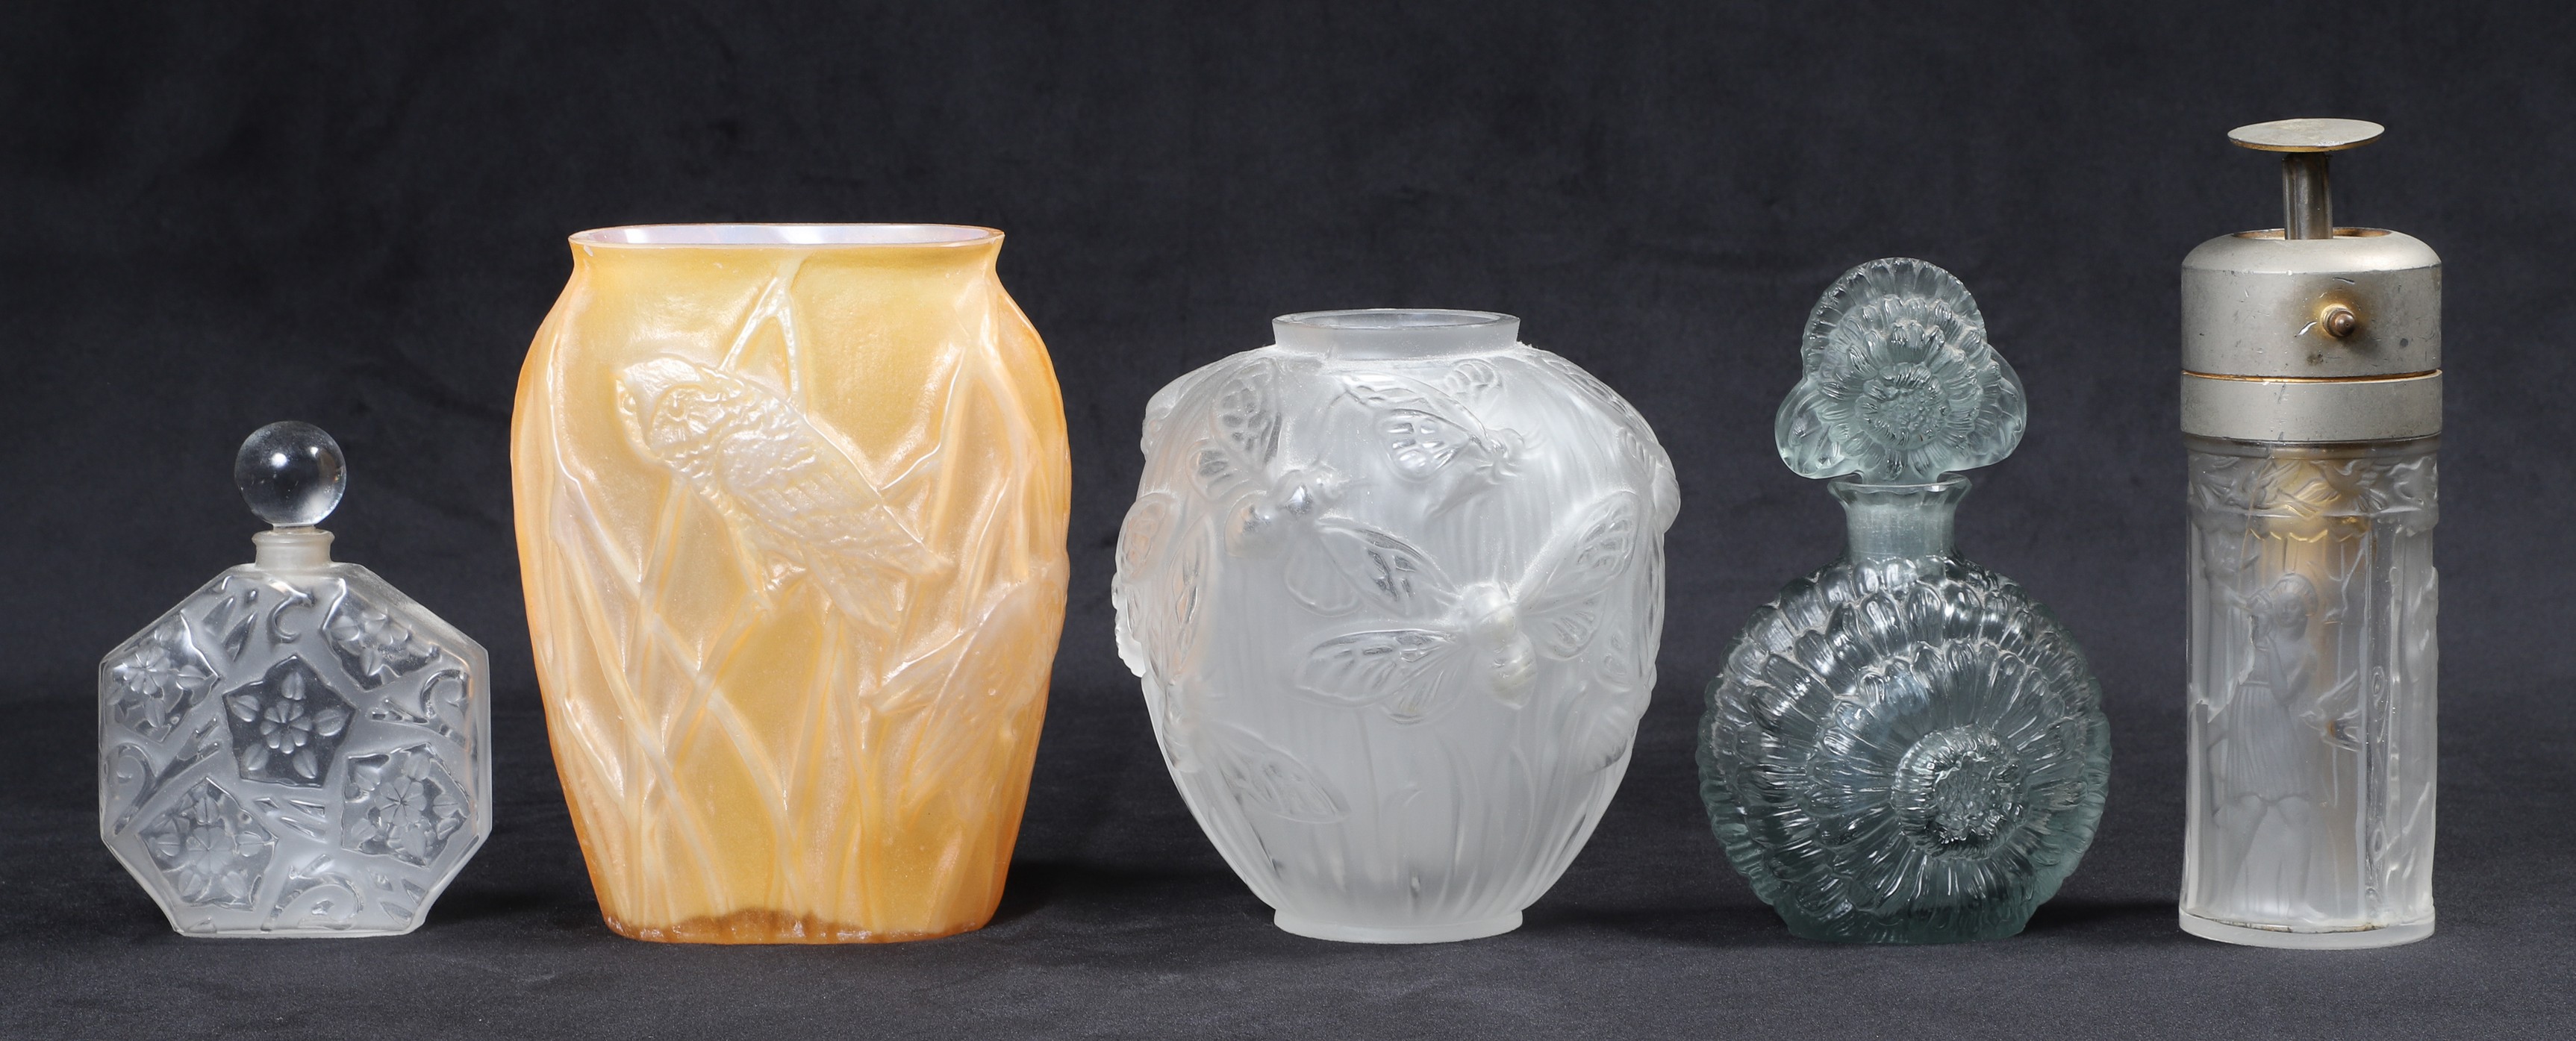  5 Art Deco vases and scent bottles 2e07ac